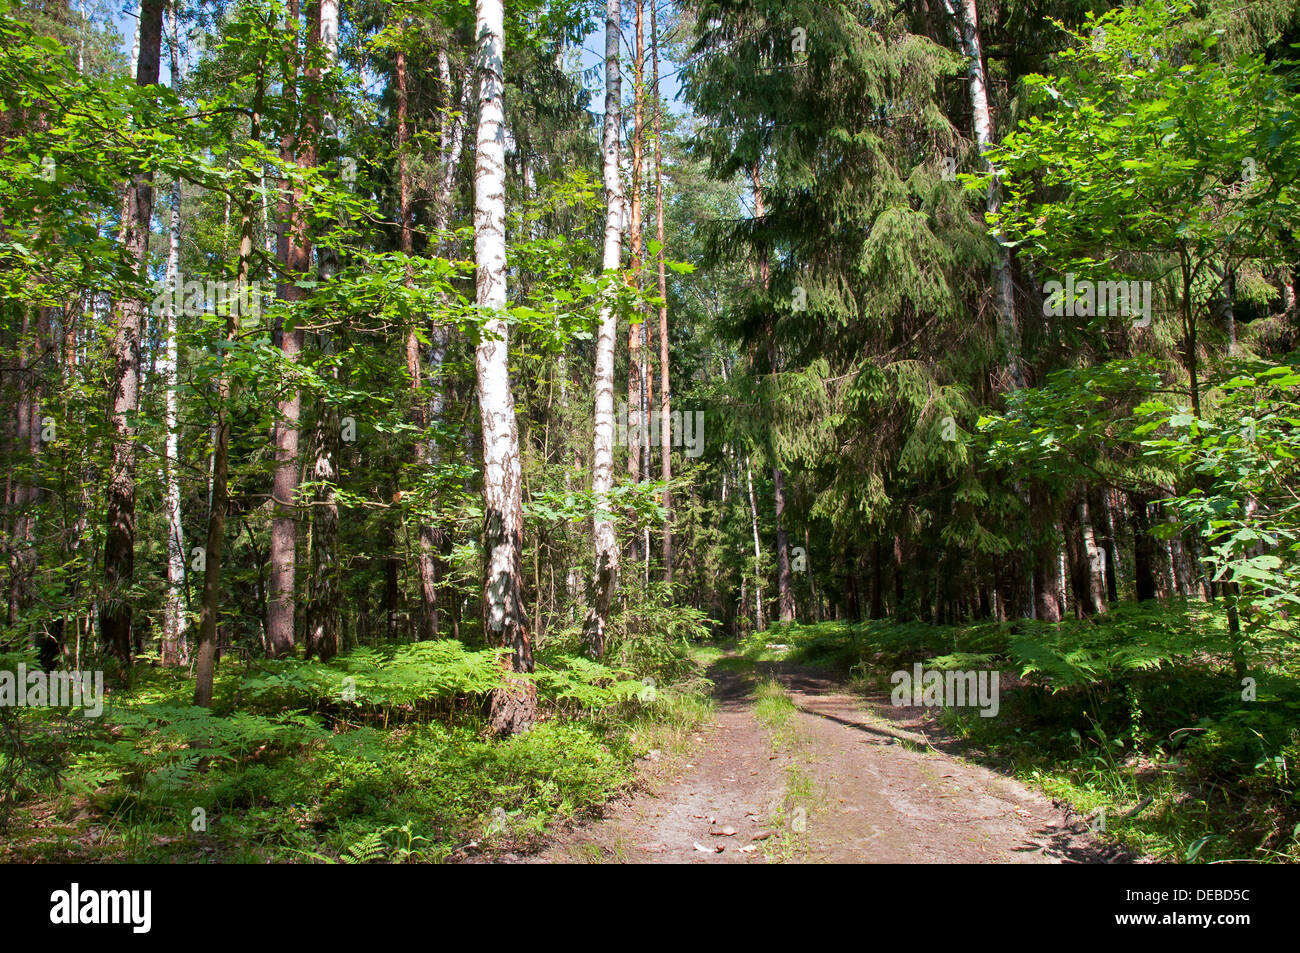 landscape of the road in the pine and birch forest Stock Photo